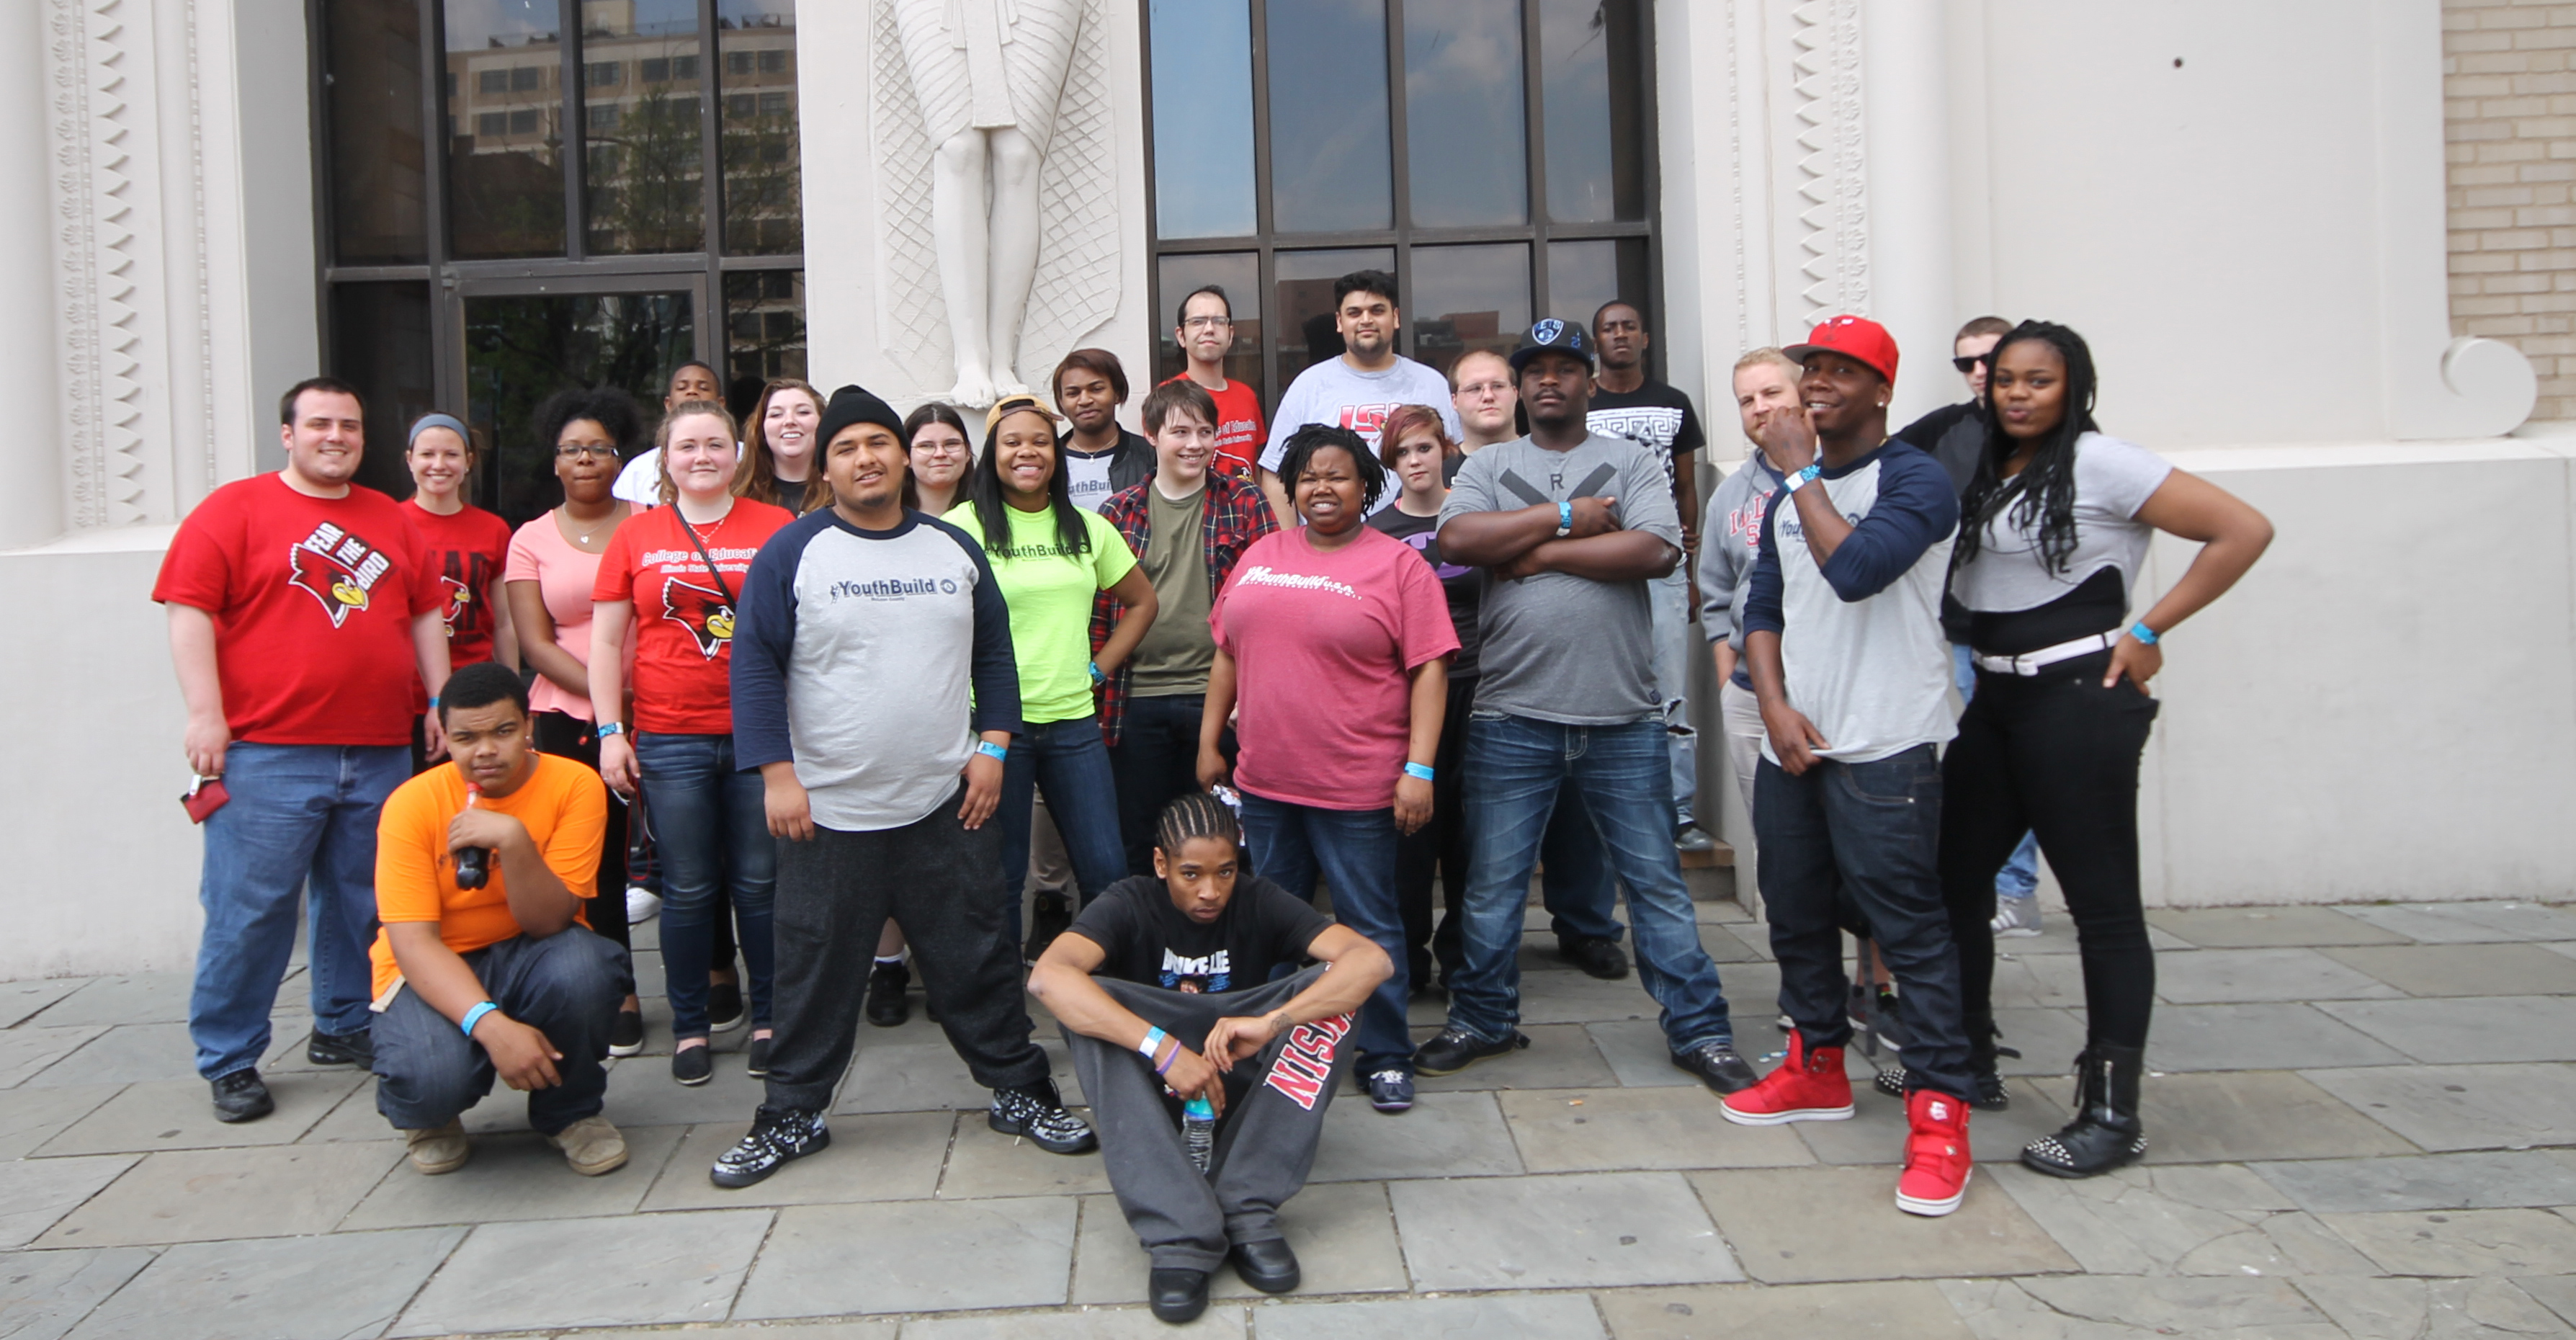 YouthBuild students and Illinois State teacher candidates explored the City Museum of St. Louis together.